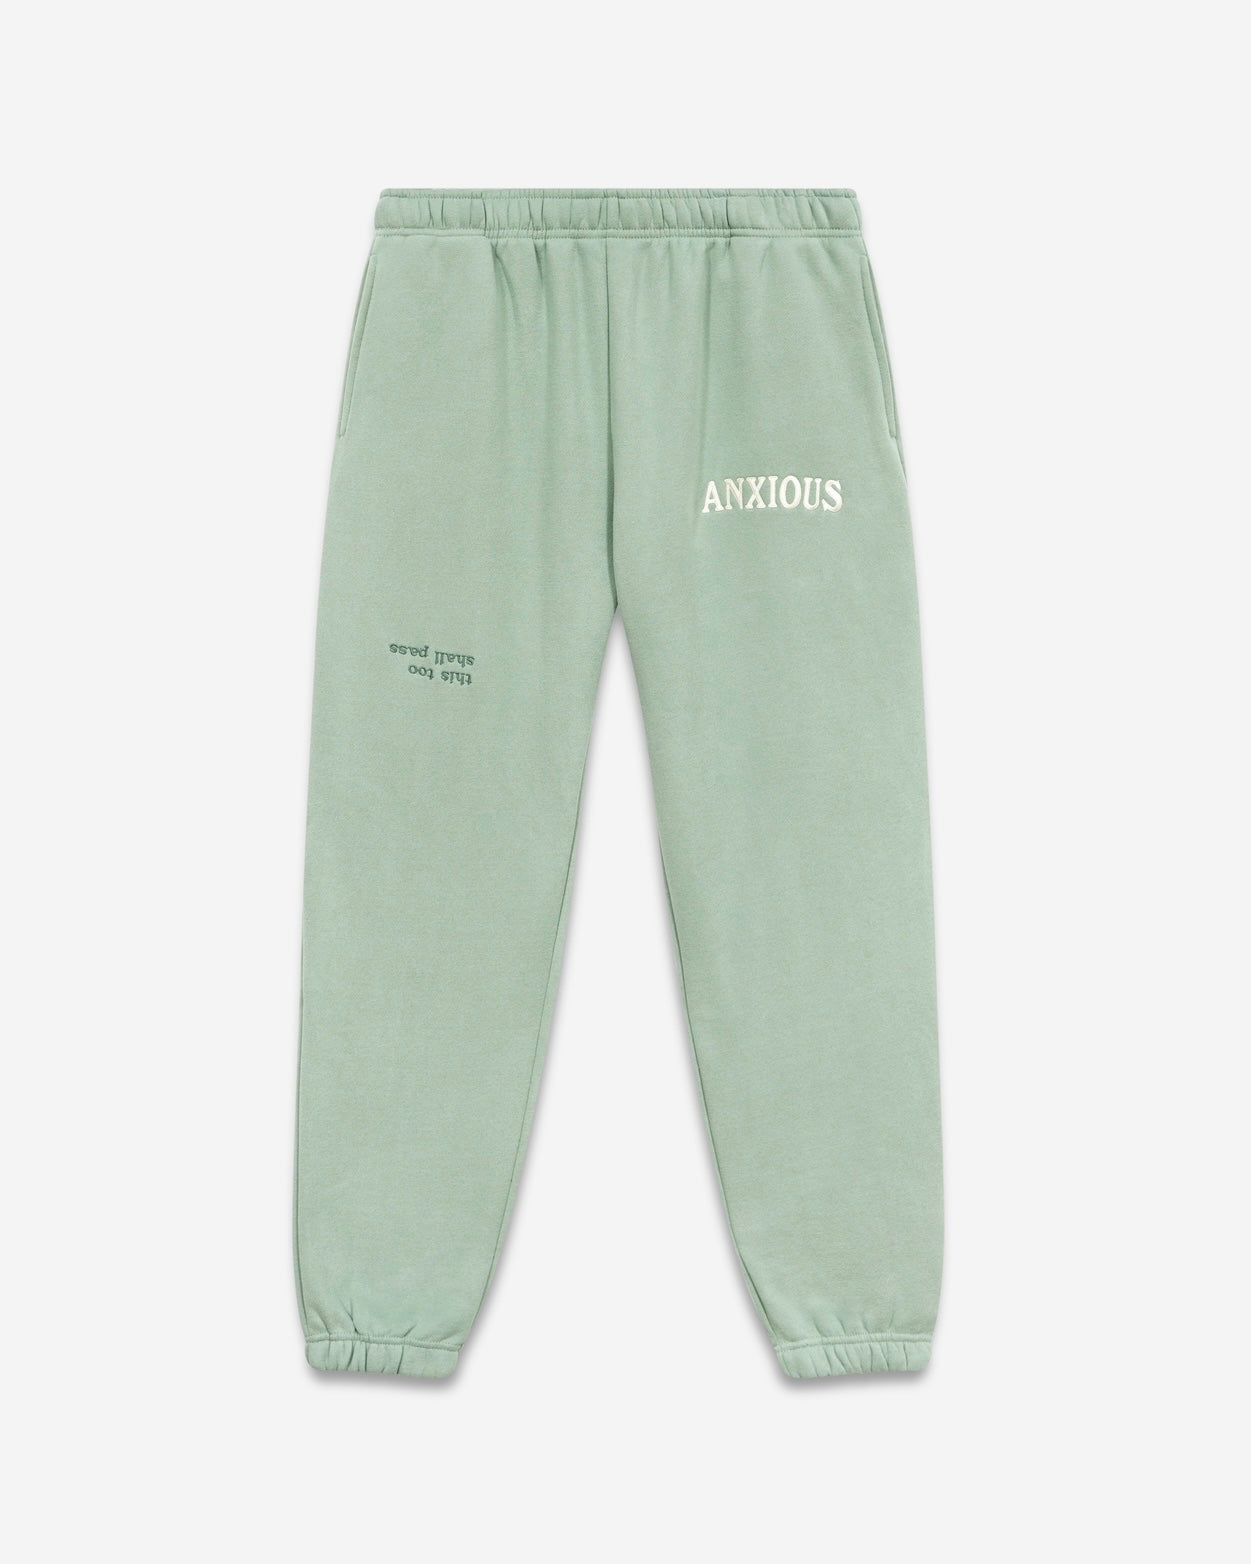 Anxious (this too shall pass) Sweatpants